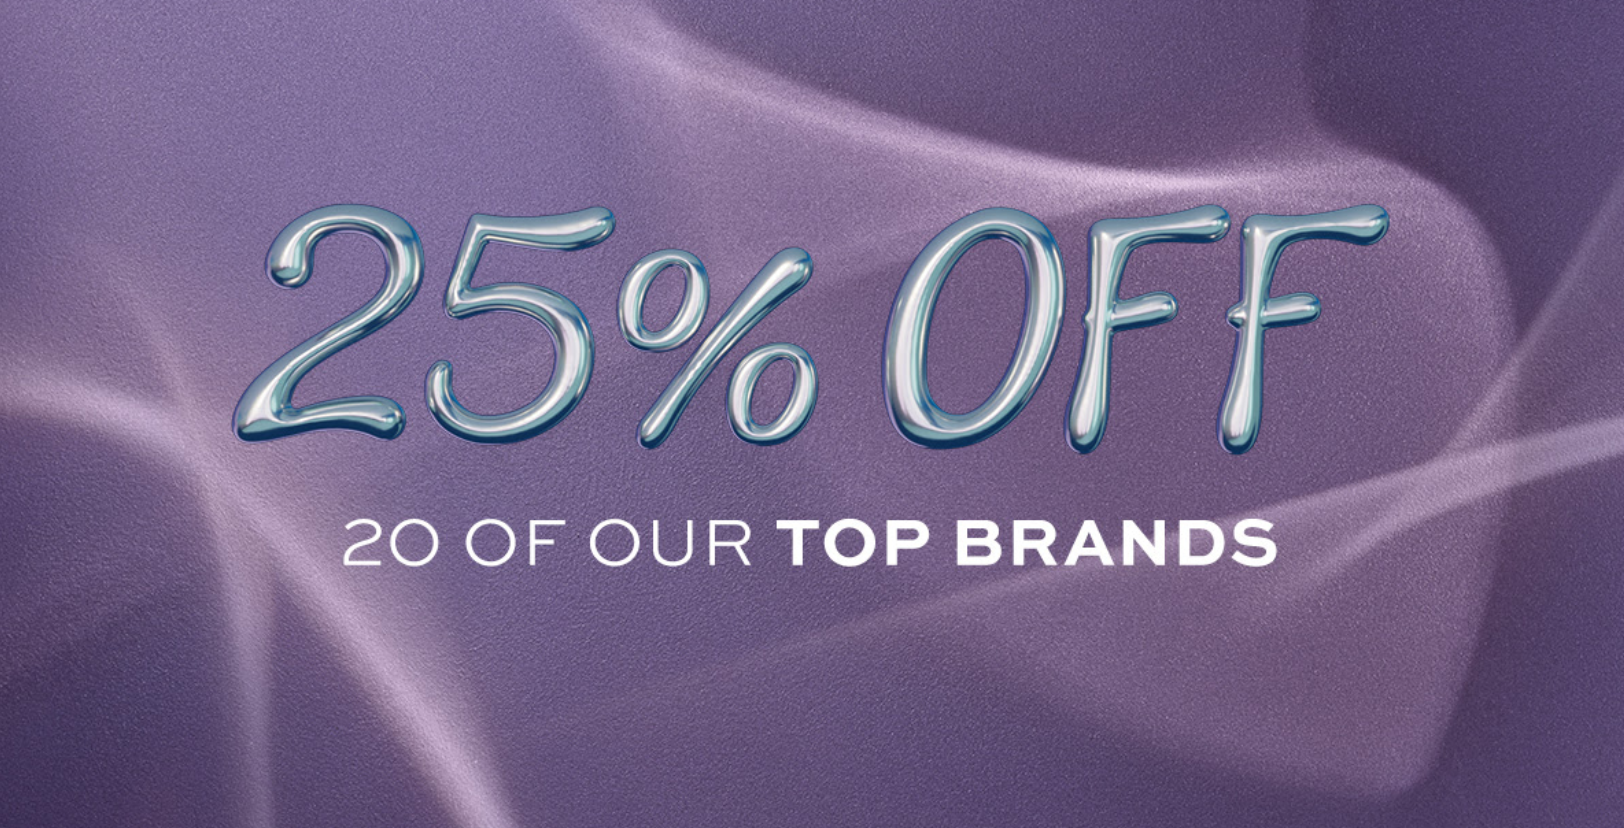 Black Friday at Cult Beauty: 25% off 20 Top Brands